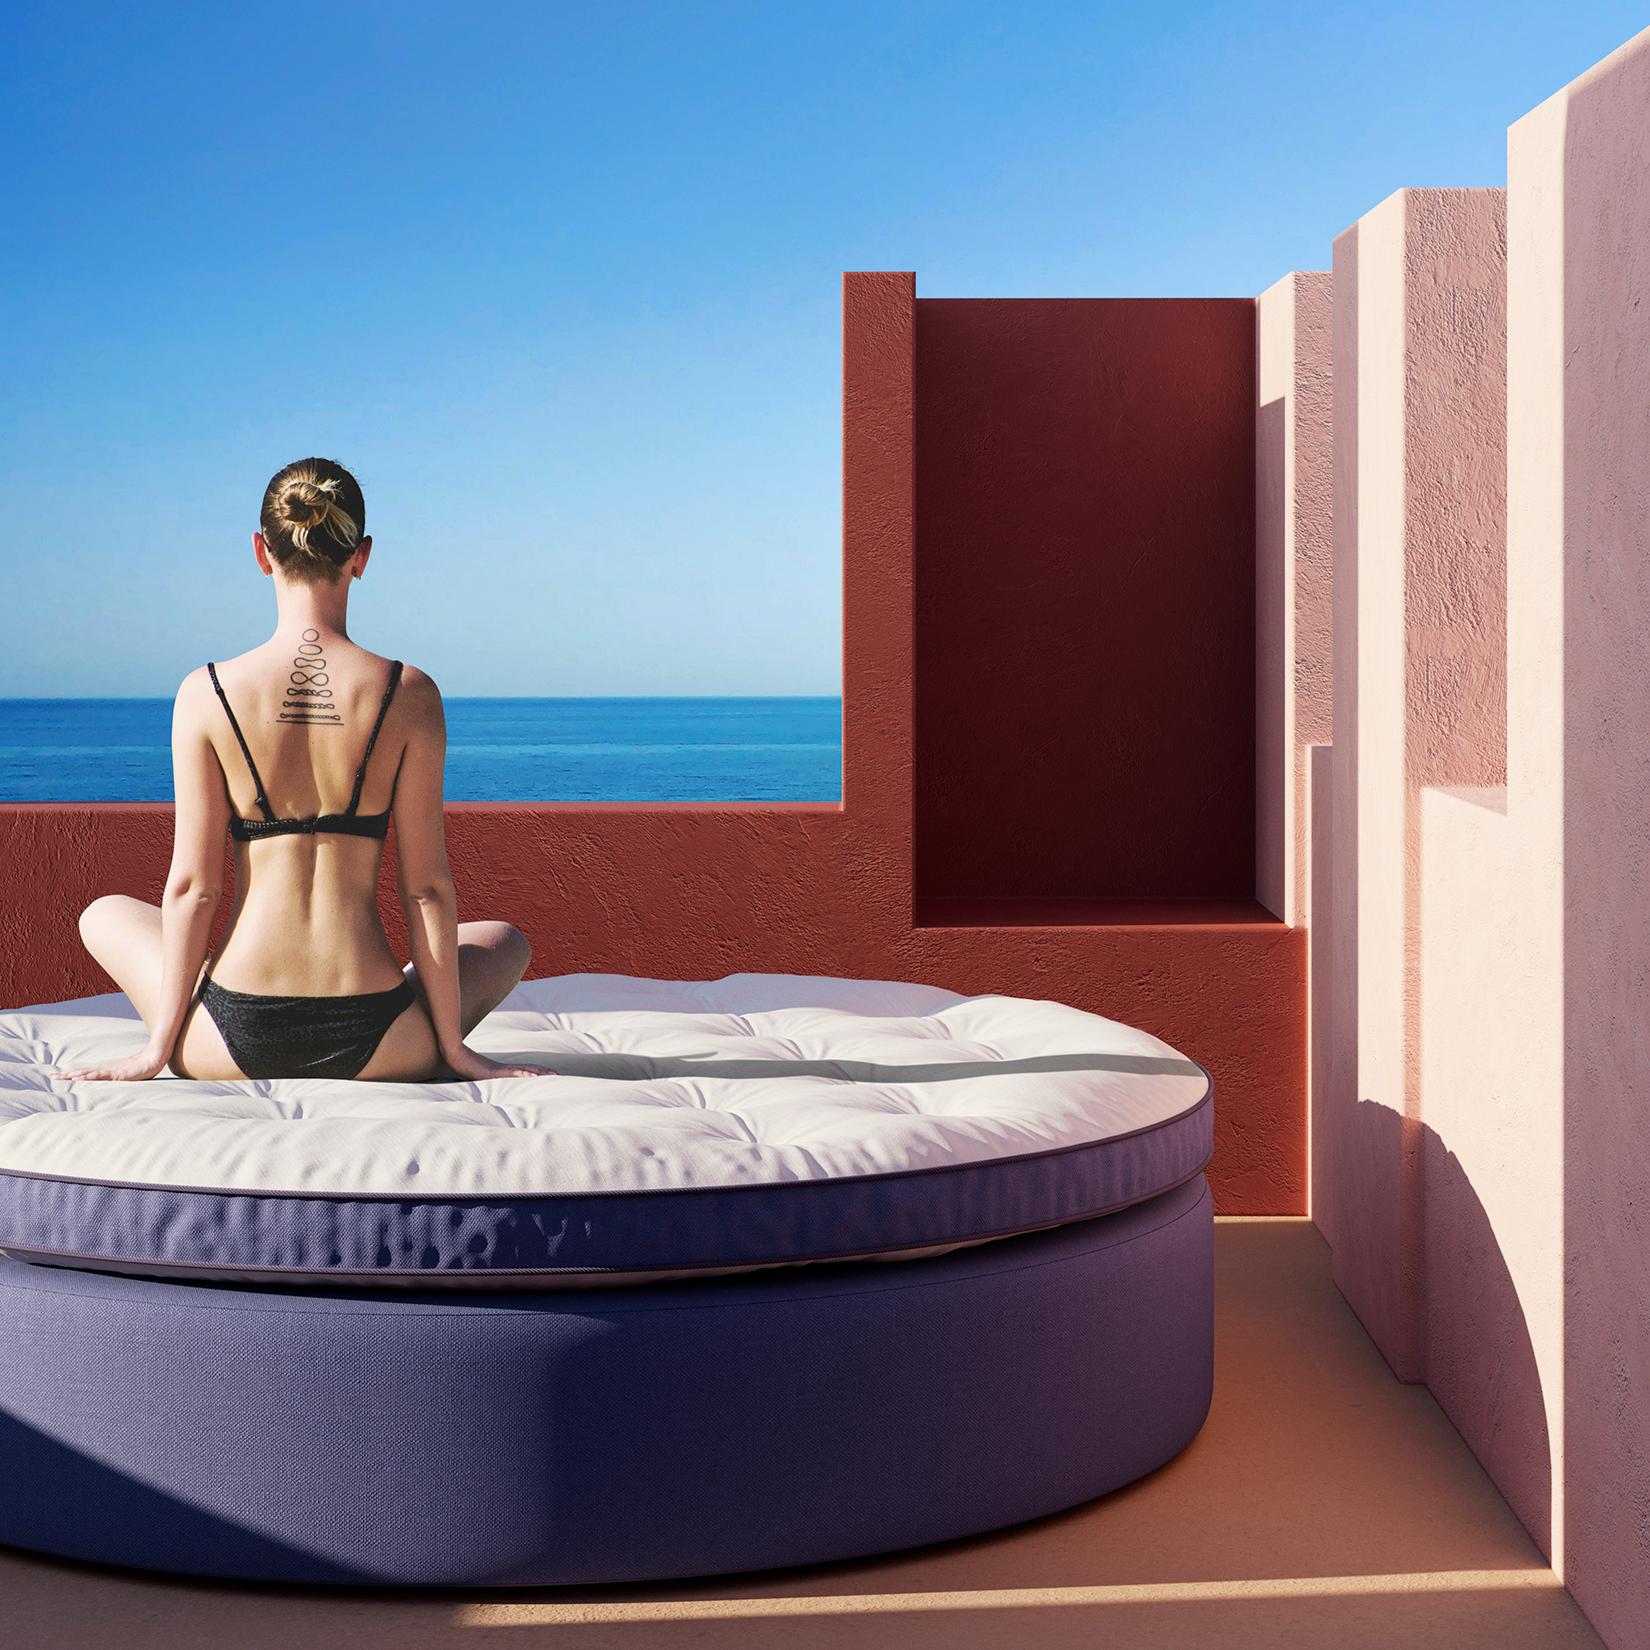 A round bed is an experience in itself: lying on a round bed gives you the unconscious trick of being more comfortable and at ease. With a round mattress you not only tend to feel more playful, but also feel much freer from the confines of a